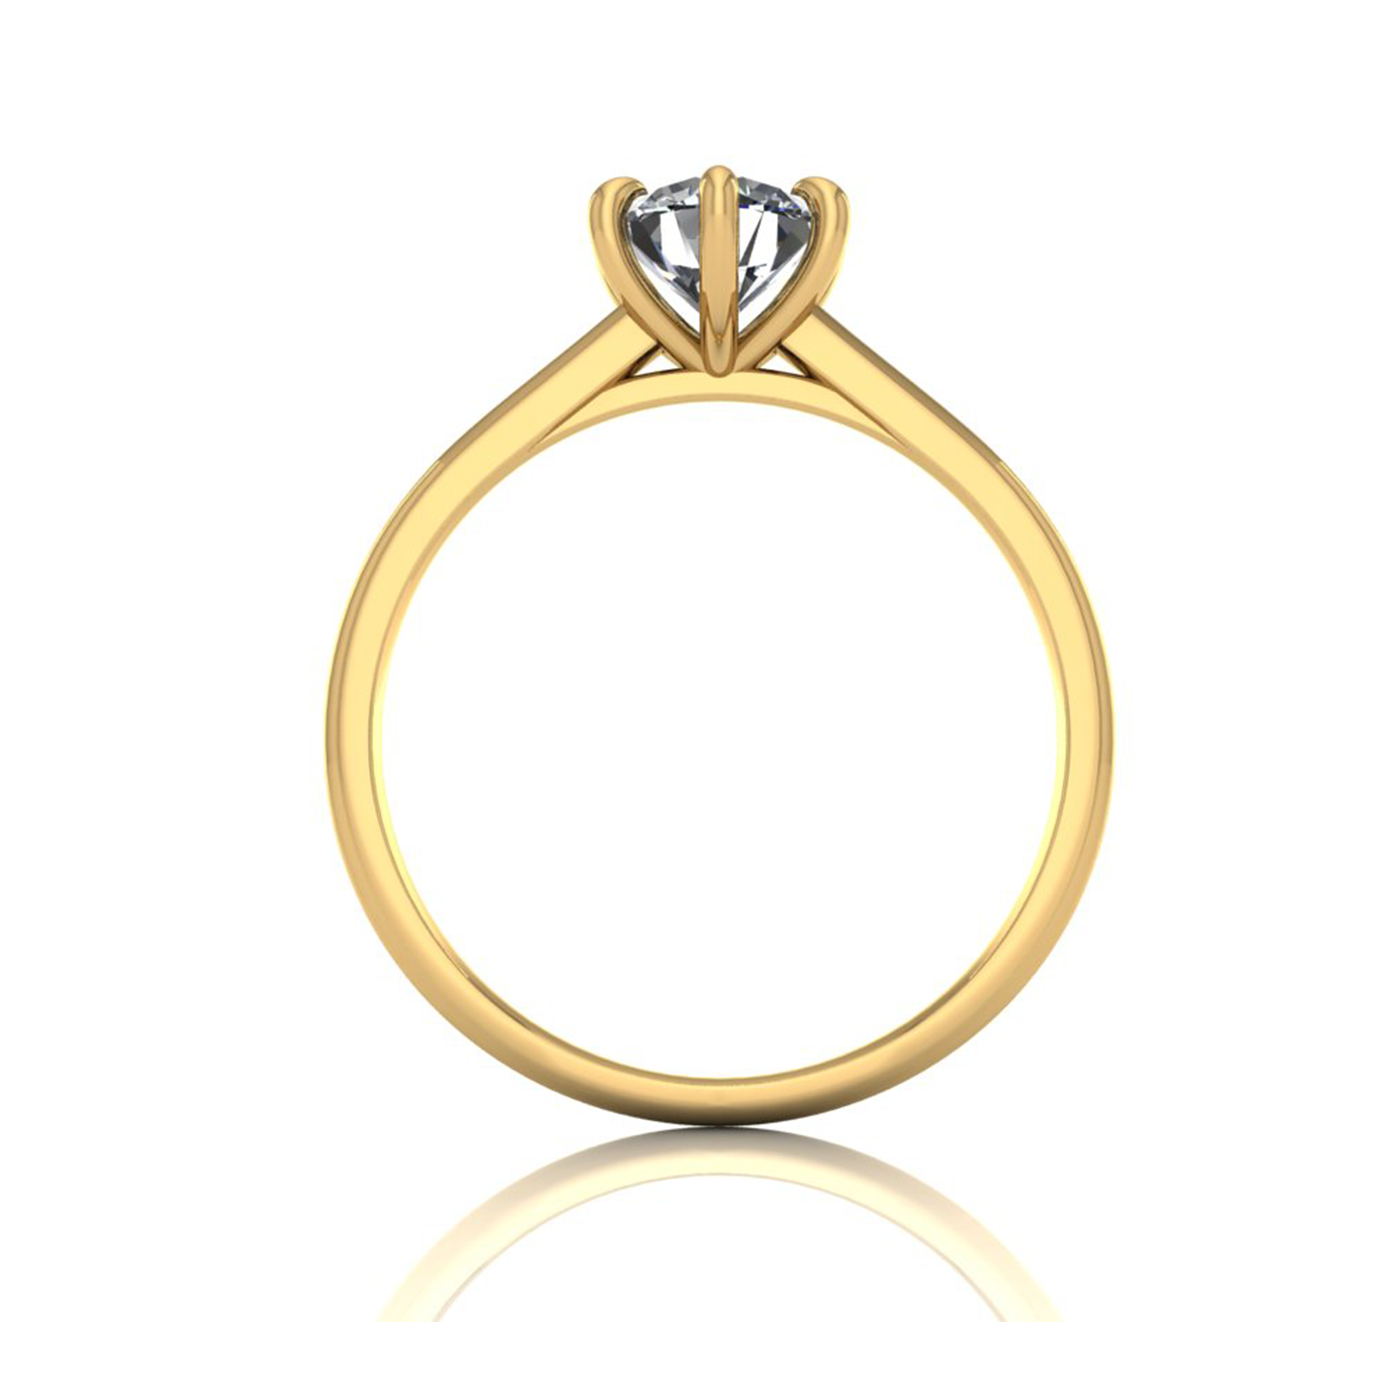 18k yellow gold 0,80 ct 6 prongs solitaire round cut diamond engagement ring with whisper thin band